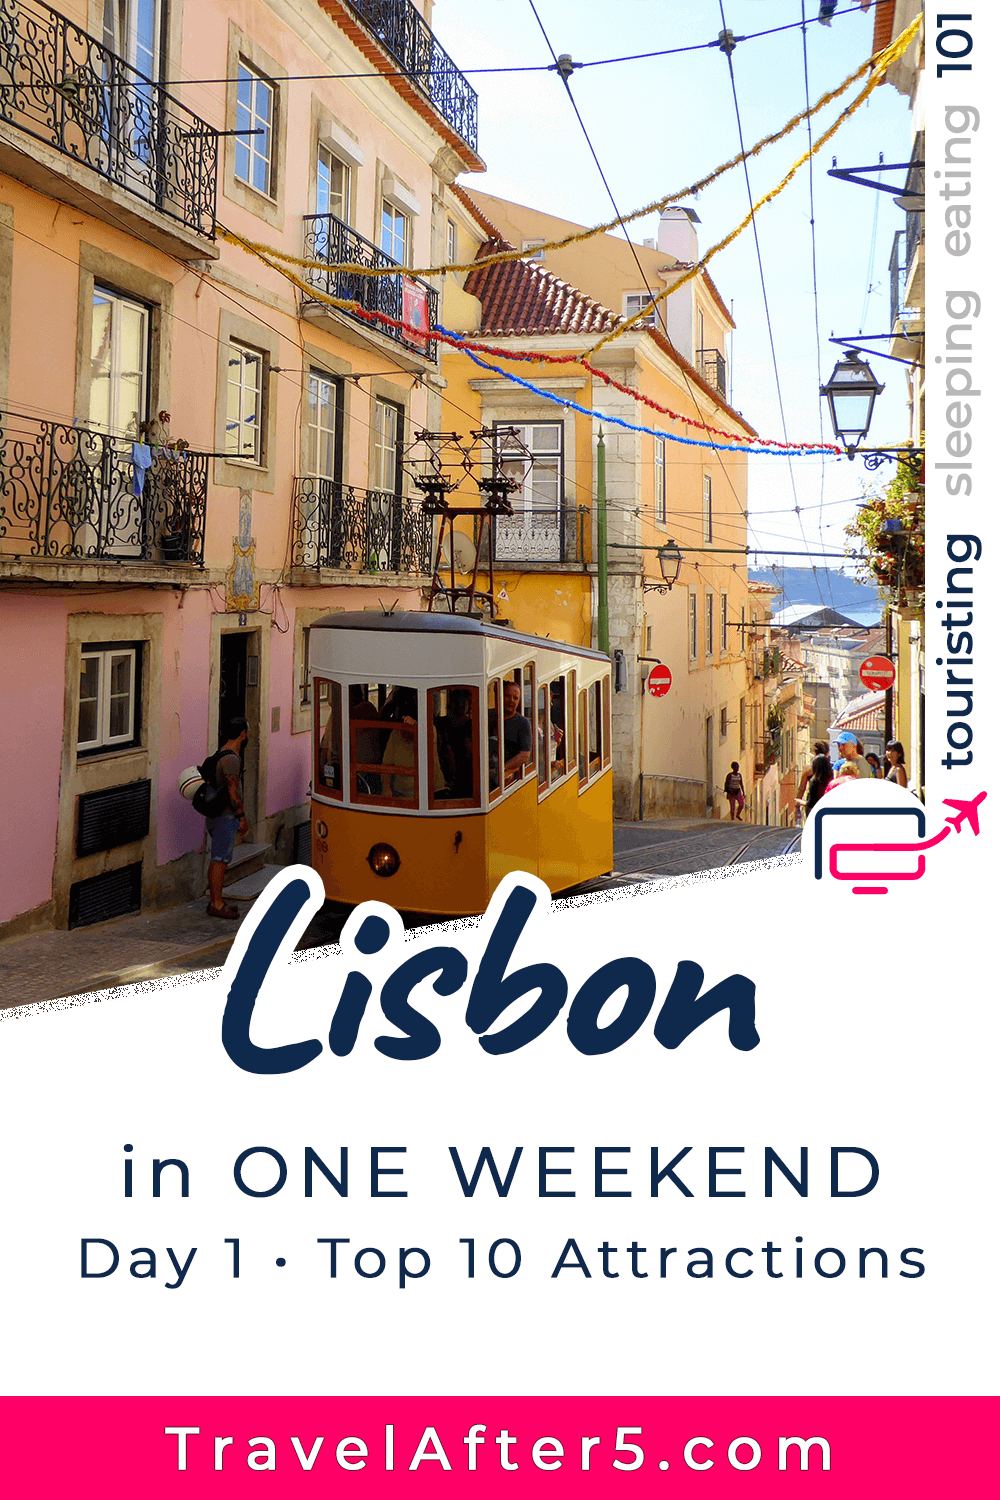 Pinterest Pin to Lisbon in One Weekend: Day 1 - Top 10 Attractions, by Travel After 5